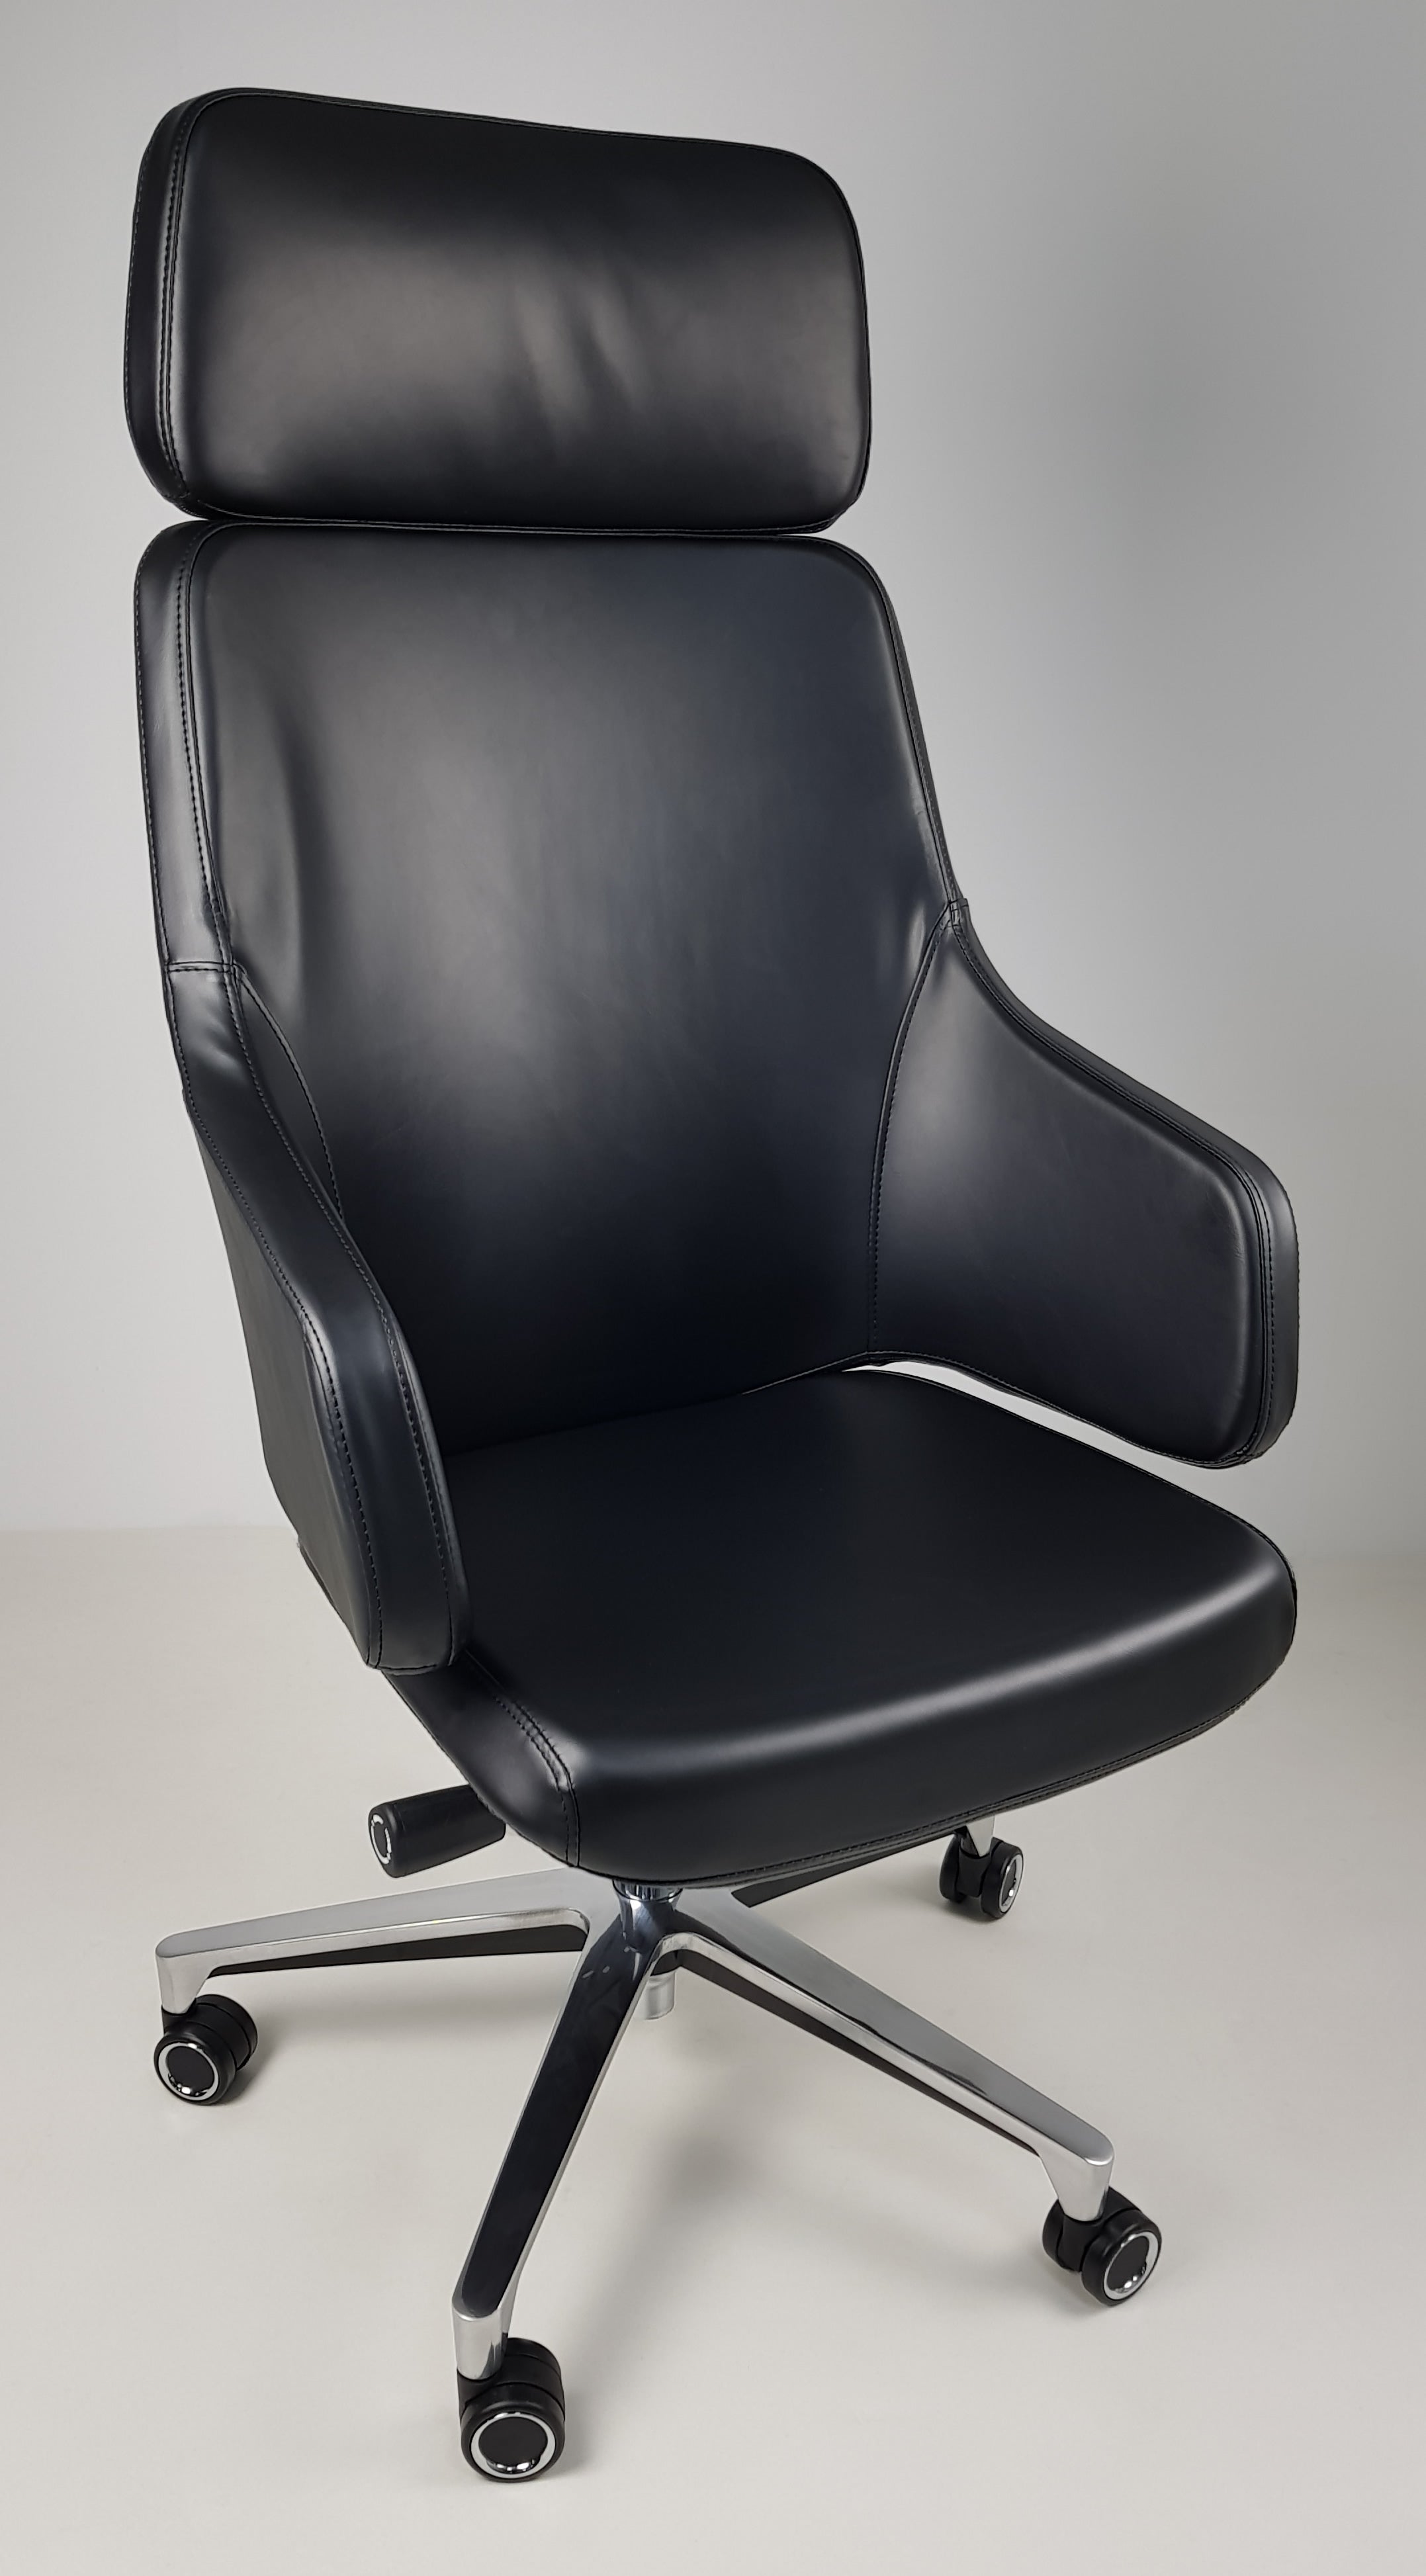 High Back Black Leather Executive Office Chair with Seat Slide - CHA-1823A UK